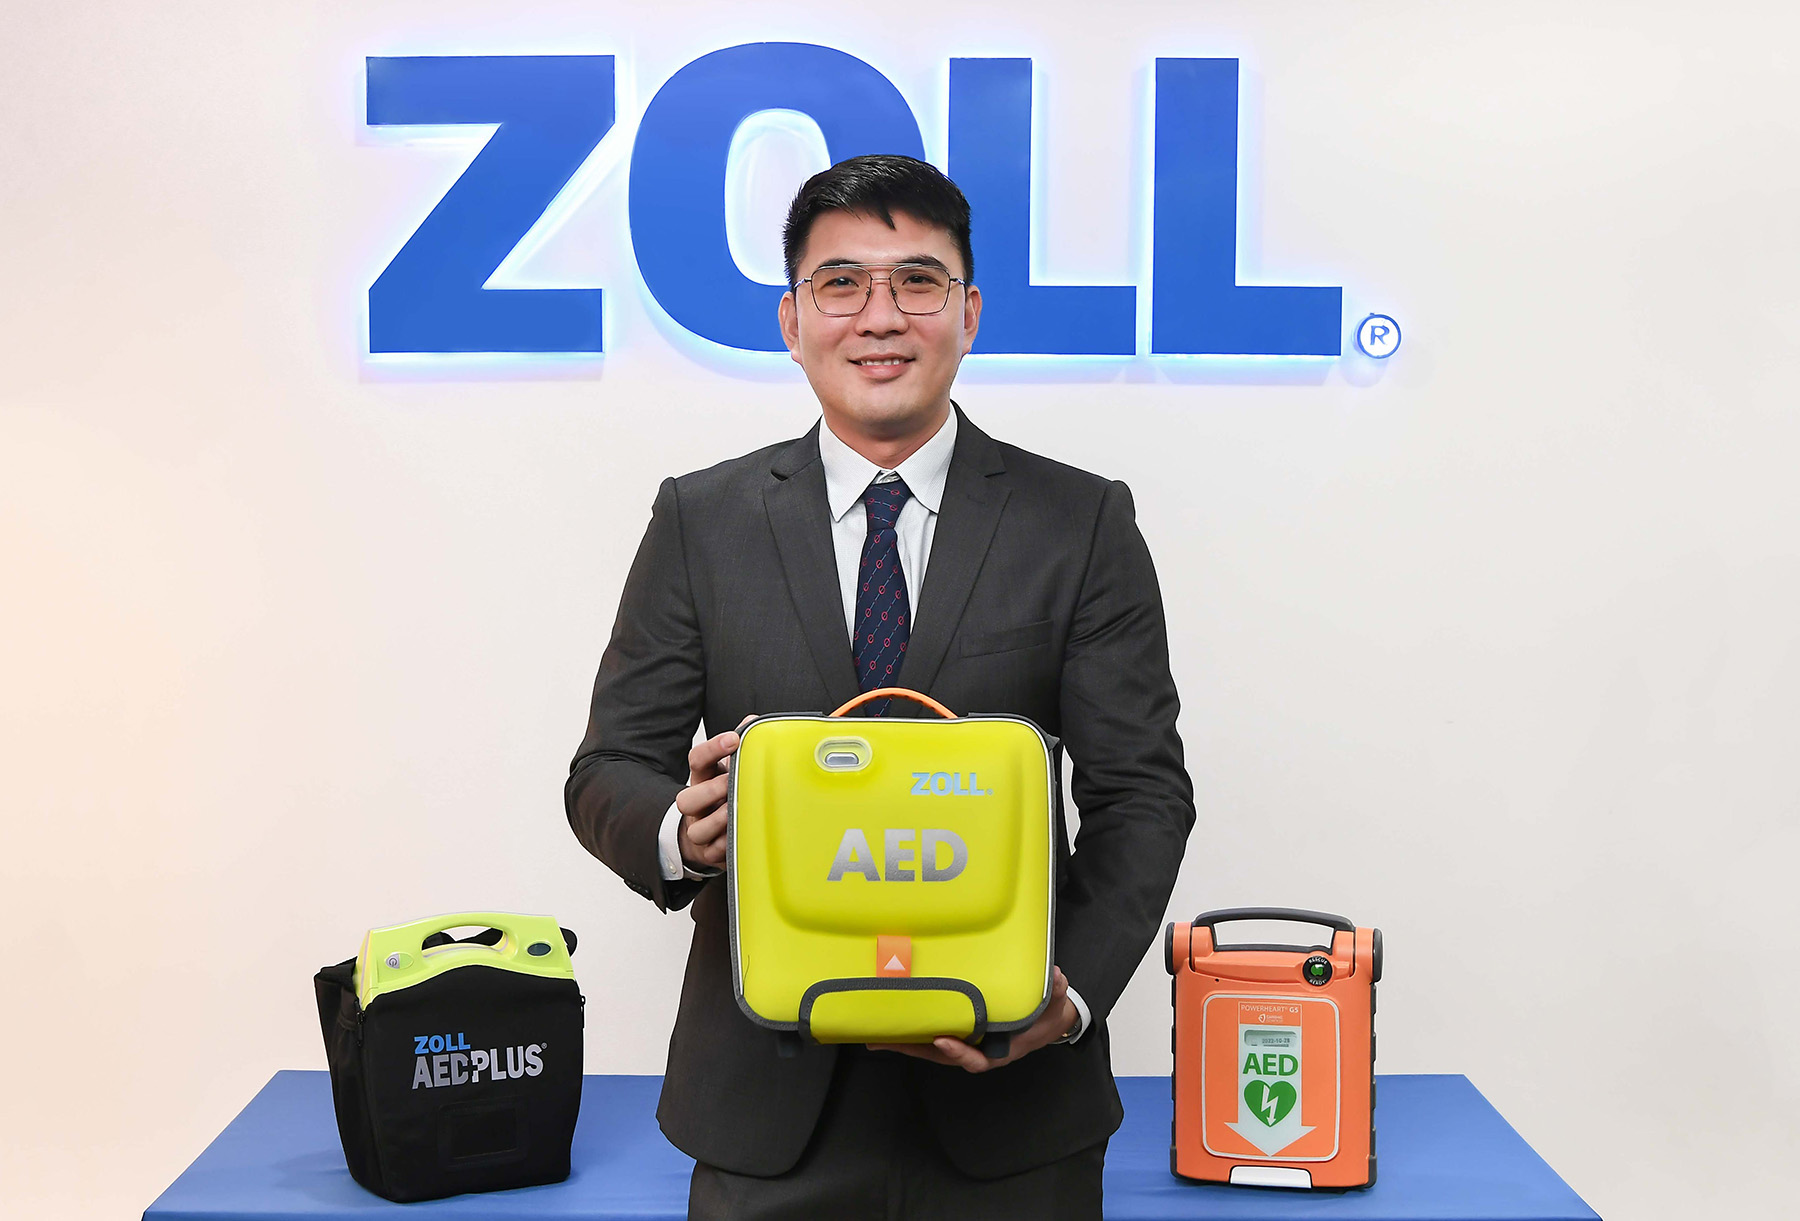 03-ZOLL-AED